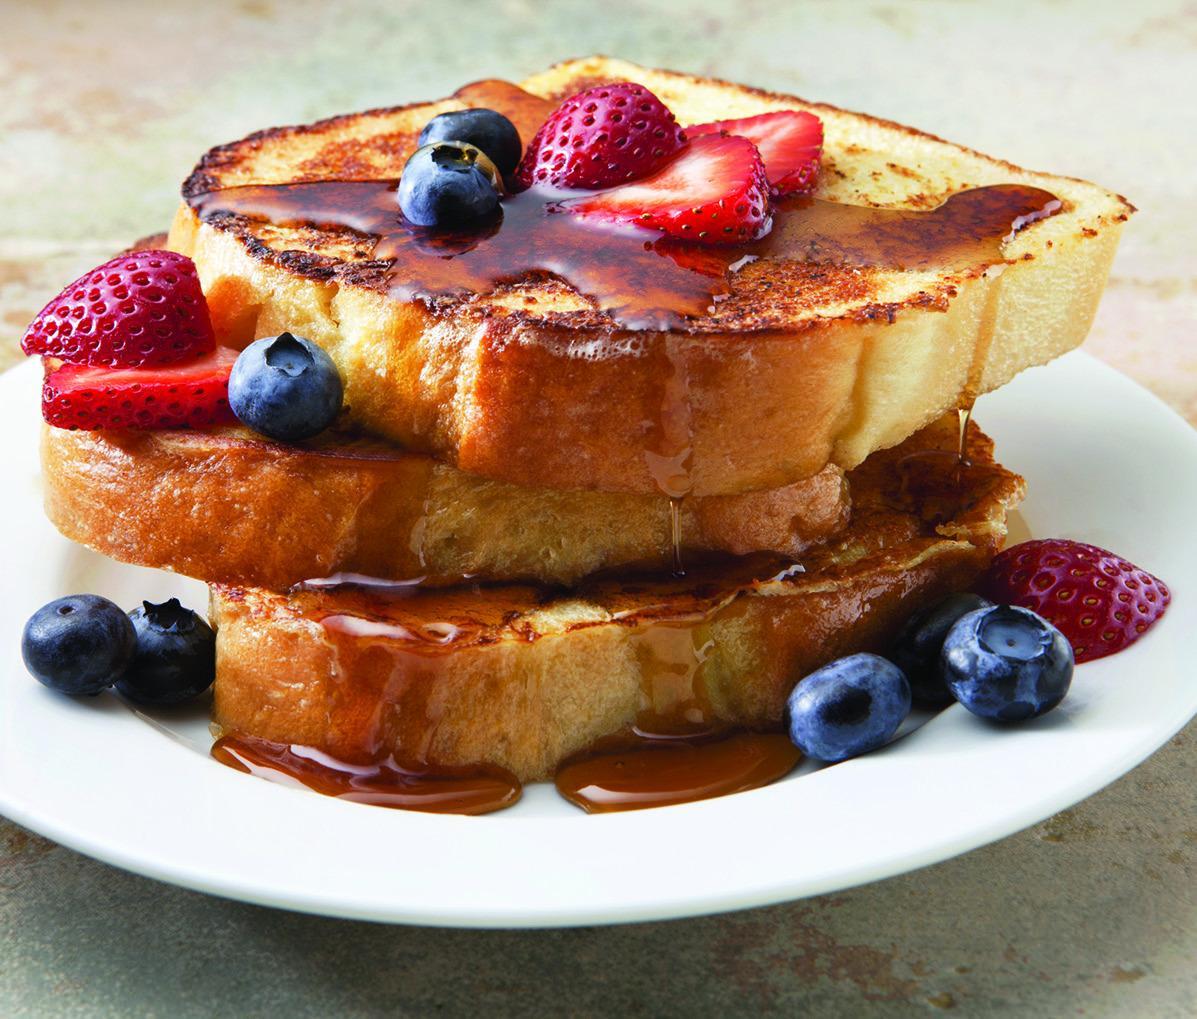 This recipe makes for a great breakfast in bed this Mother’s Day